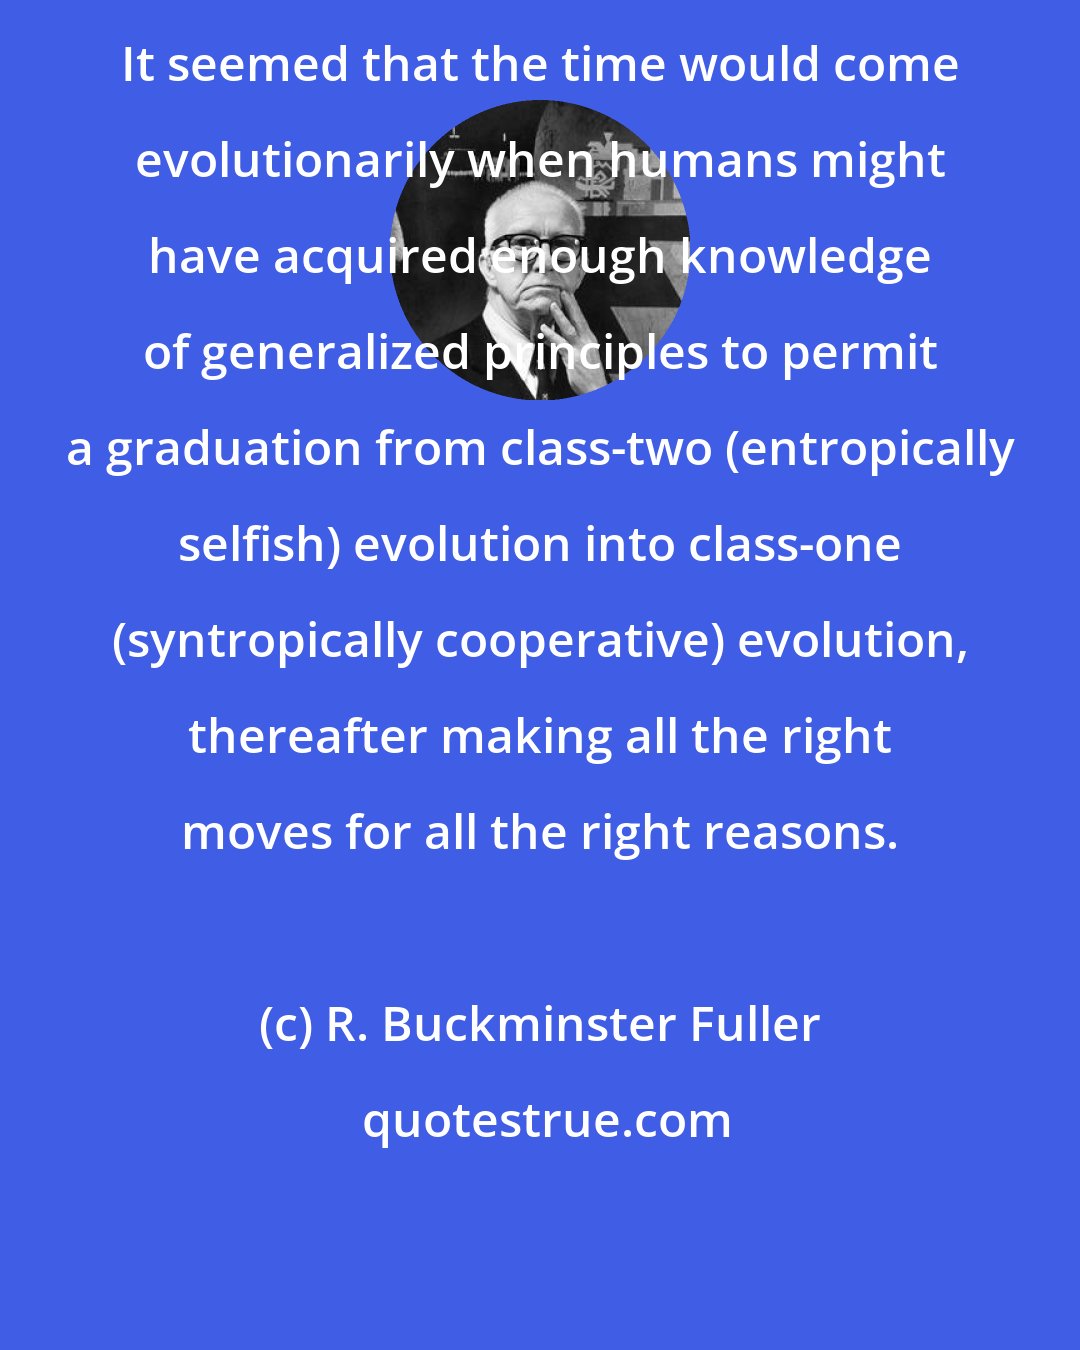 R. Buckminster Fuller: It seemed that the time would come evolutionarily when humans might have acquired enough knowledge of generalized principles to permit a graduation from class-two (entropically selfish) evolution into class-one (syntropically cooperative) evolution, thereafter making all the right moves for all the right reasons.